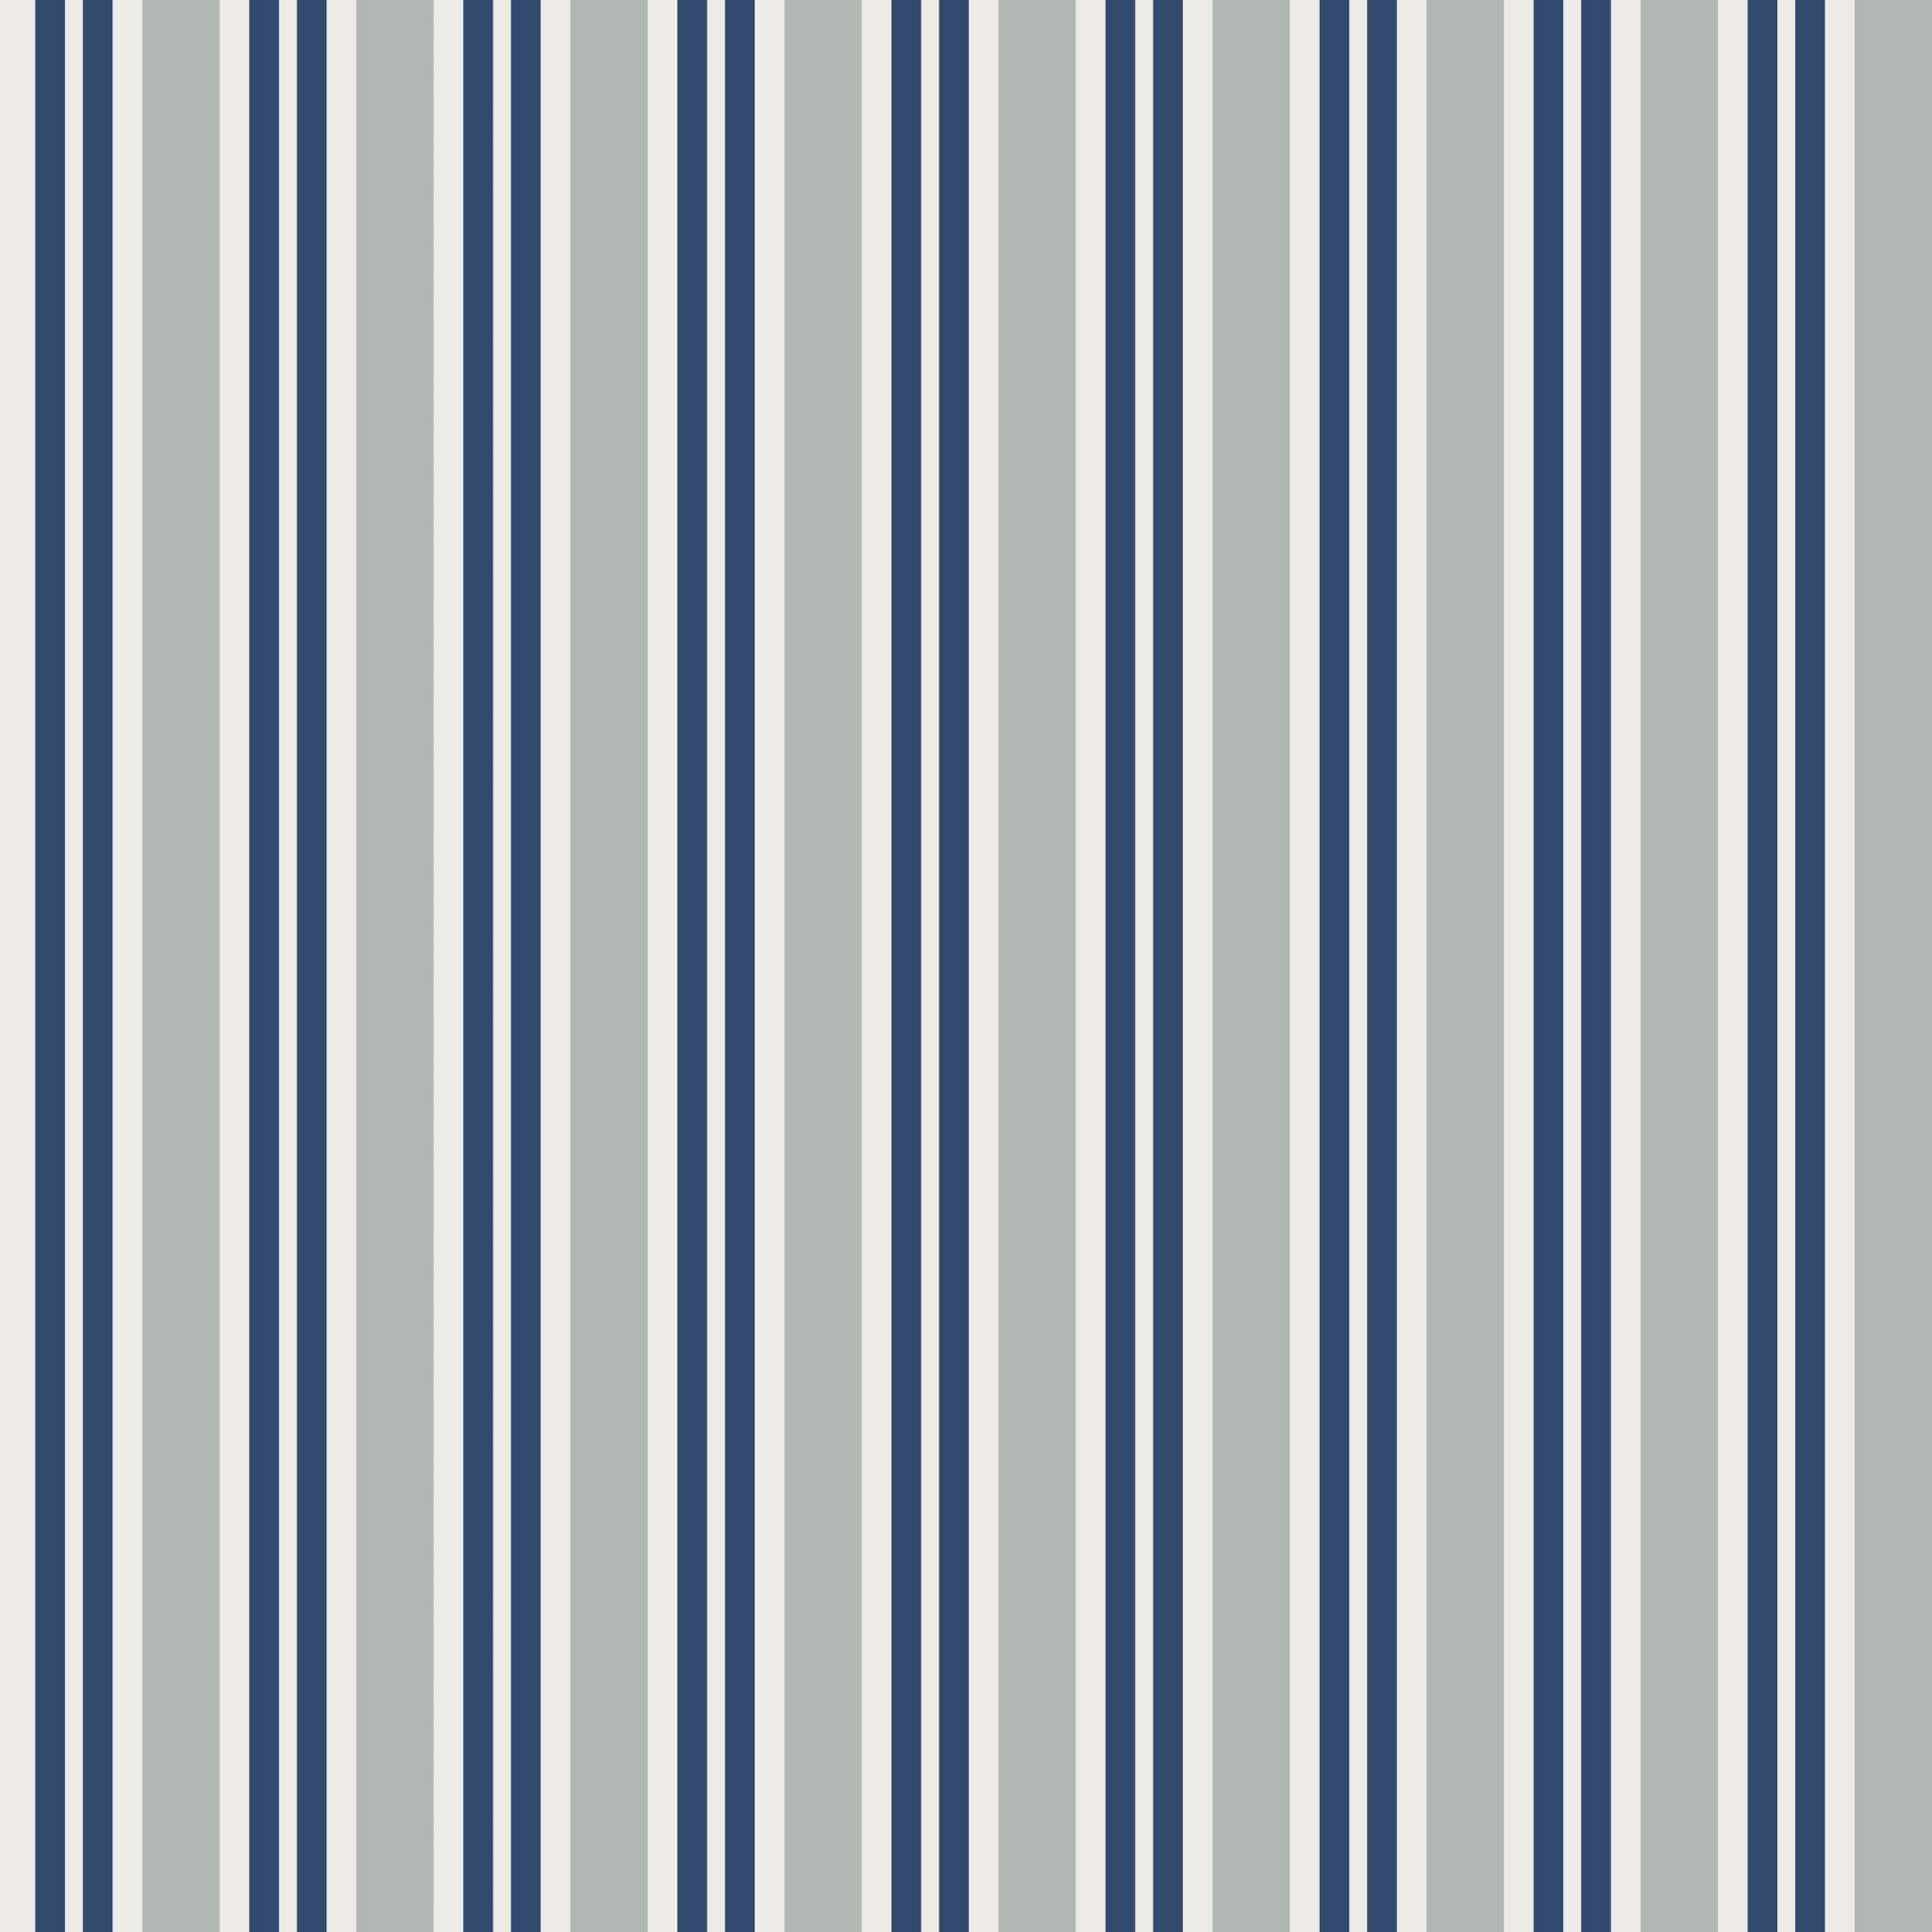 "Wall Blush Crue Wallpaper with vertical stripes installed in a contemporary living room, accent wall focus."